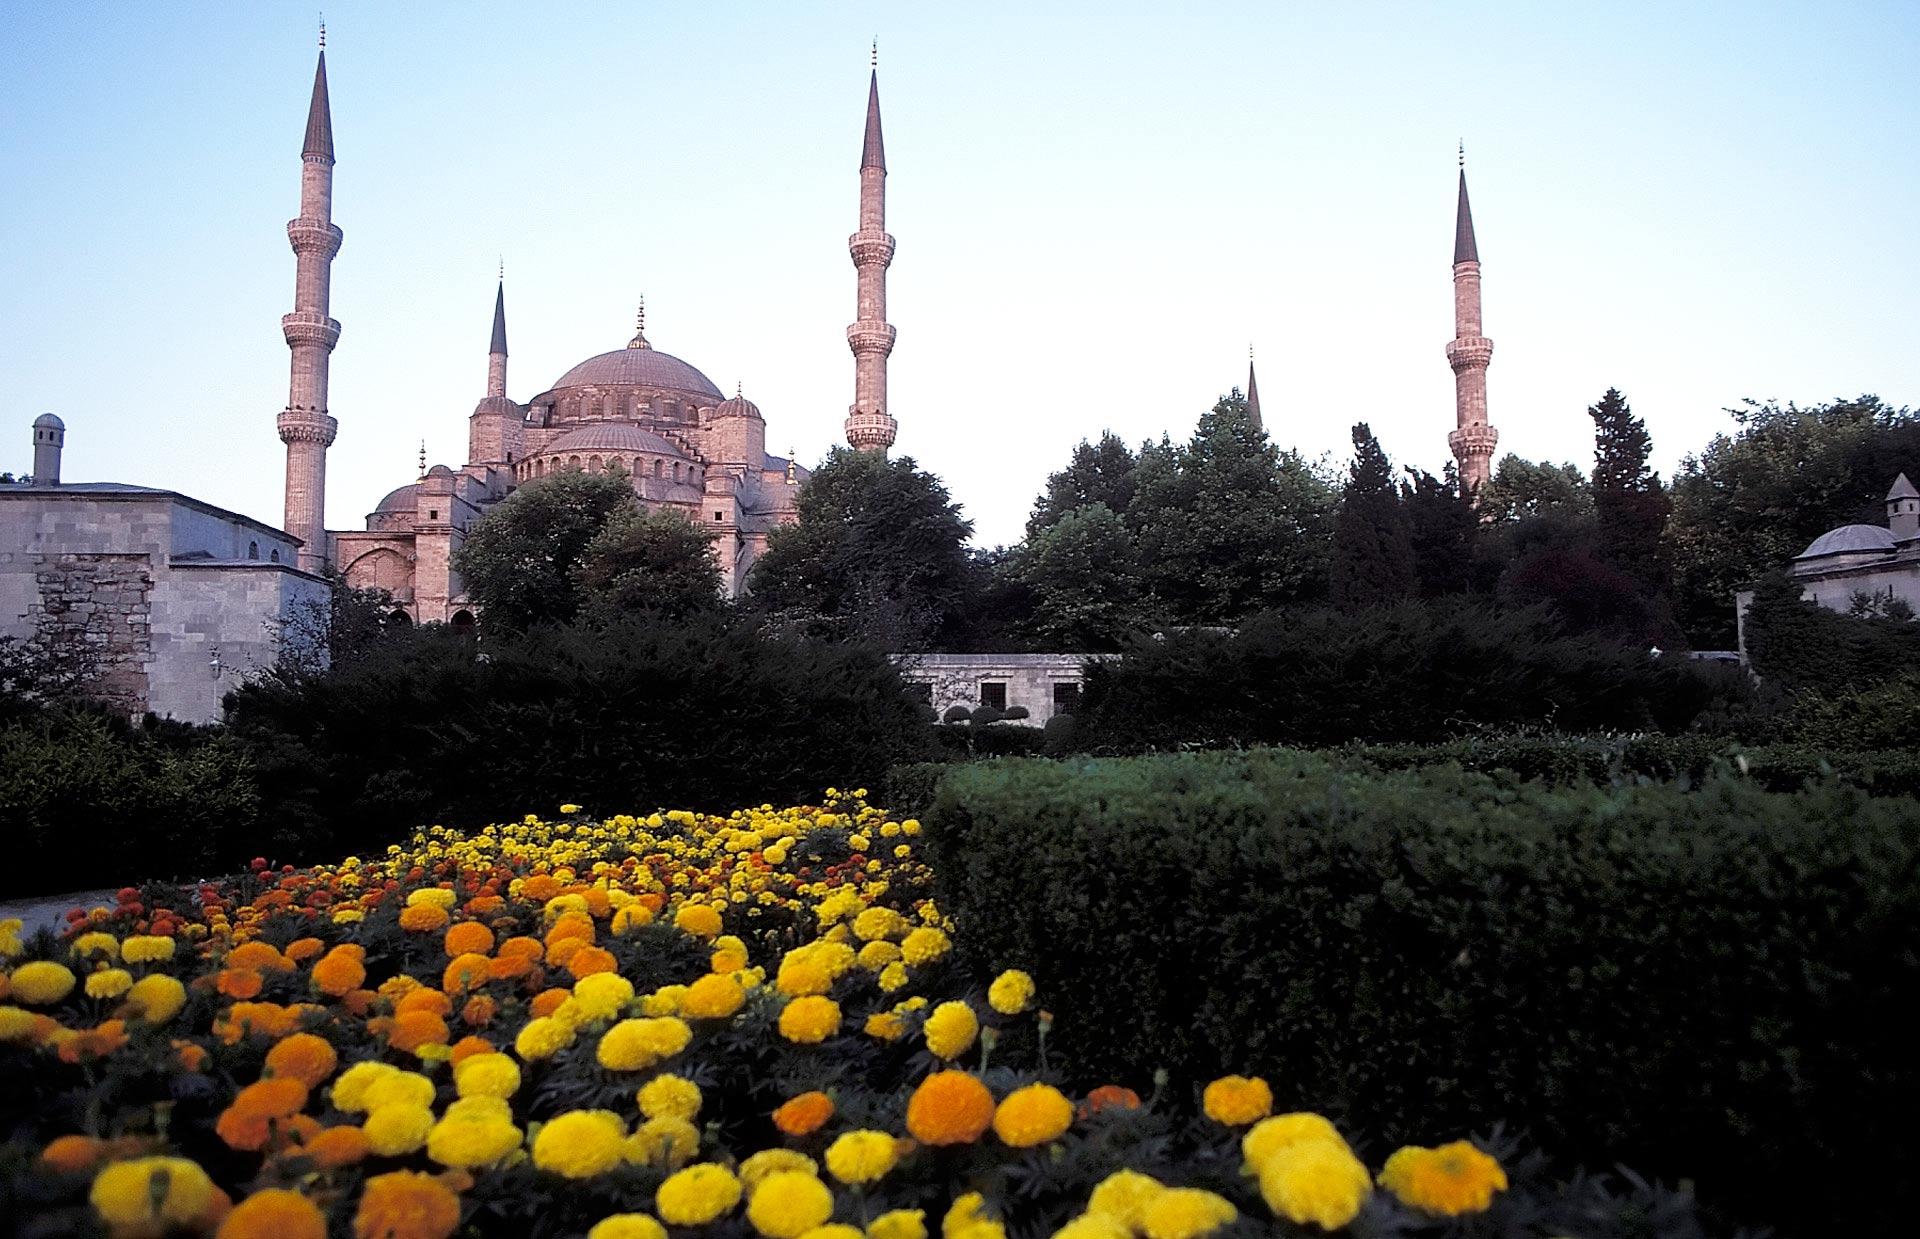 Sultan Ahmed Mosque (Blue Mosque), Istanbul, Turkey